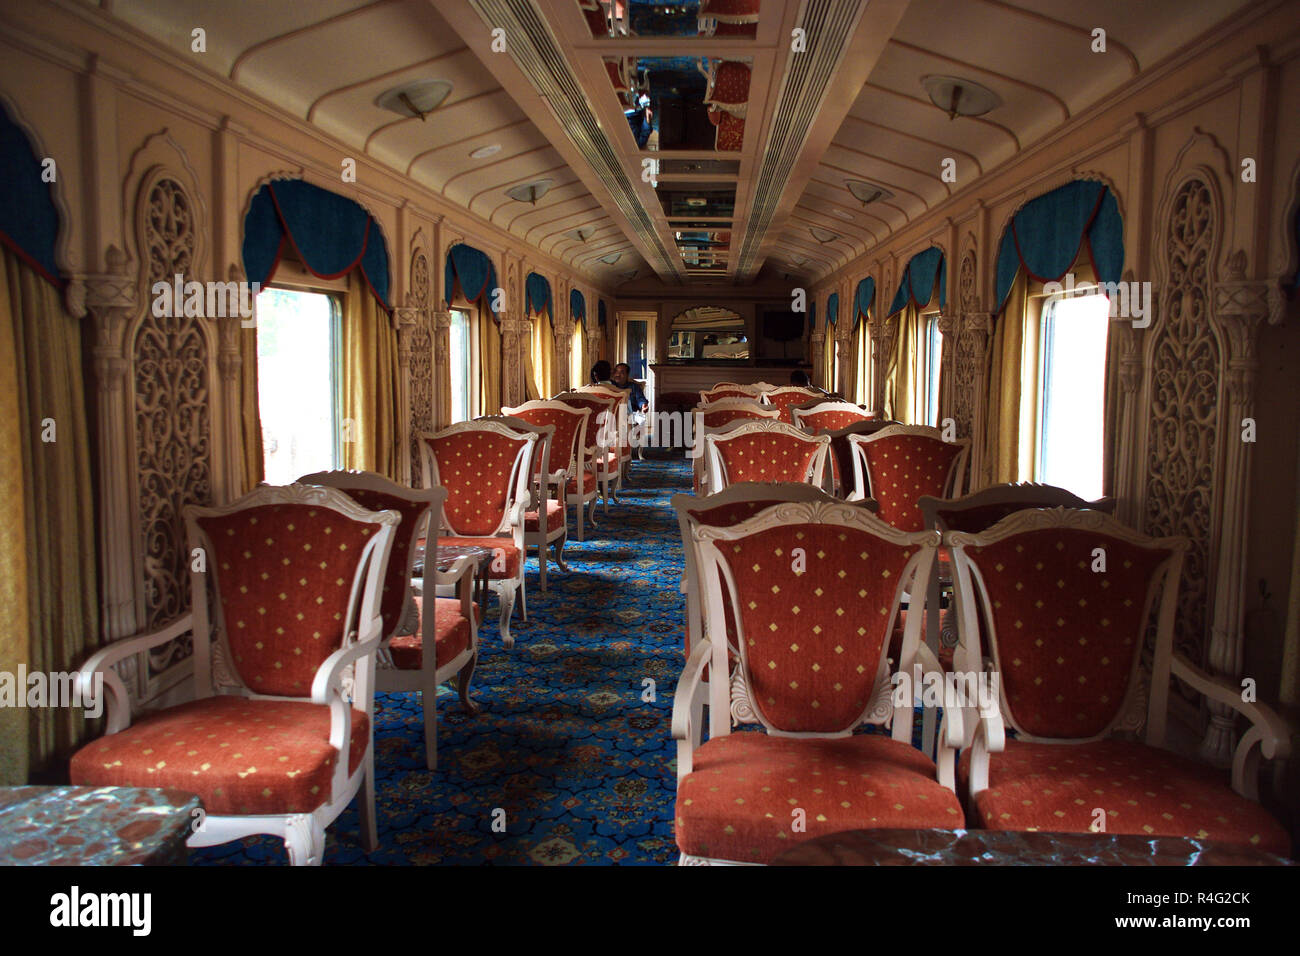 A luxury train journey on the Golden Chariot through South India -  Thrilling Travel